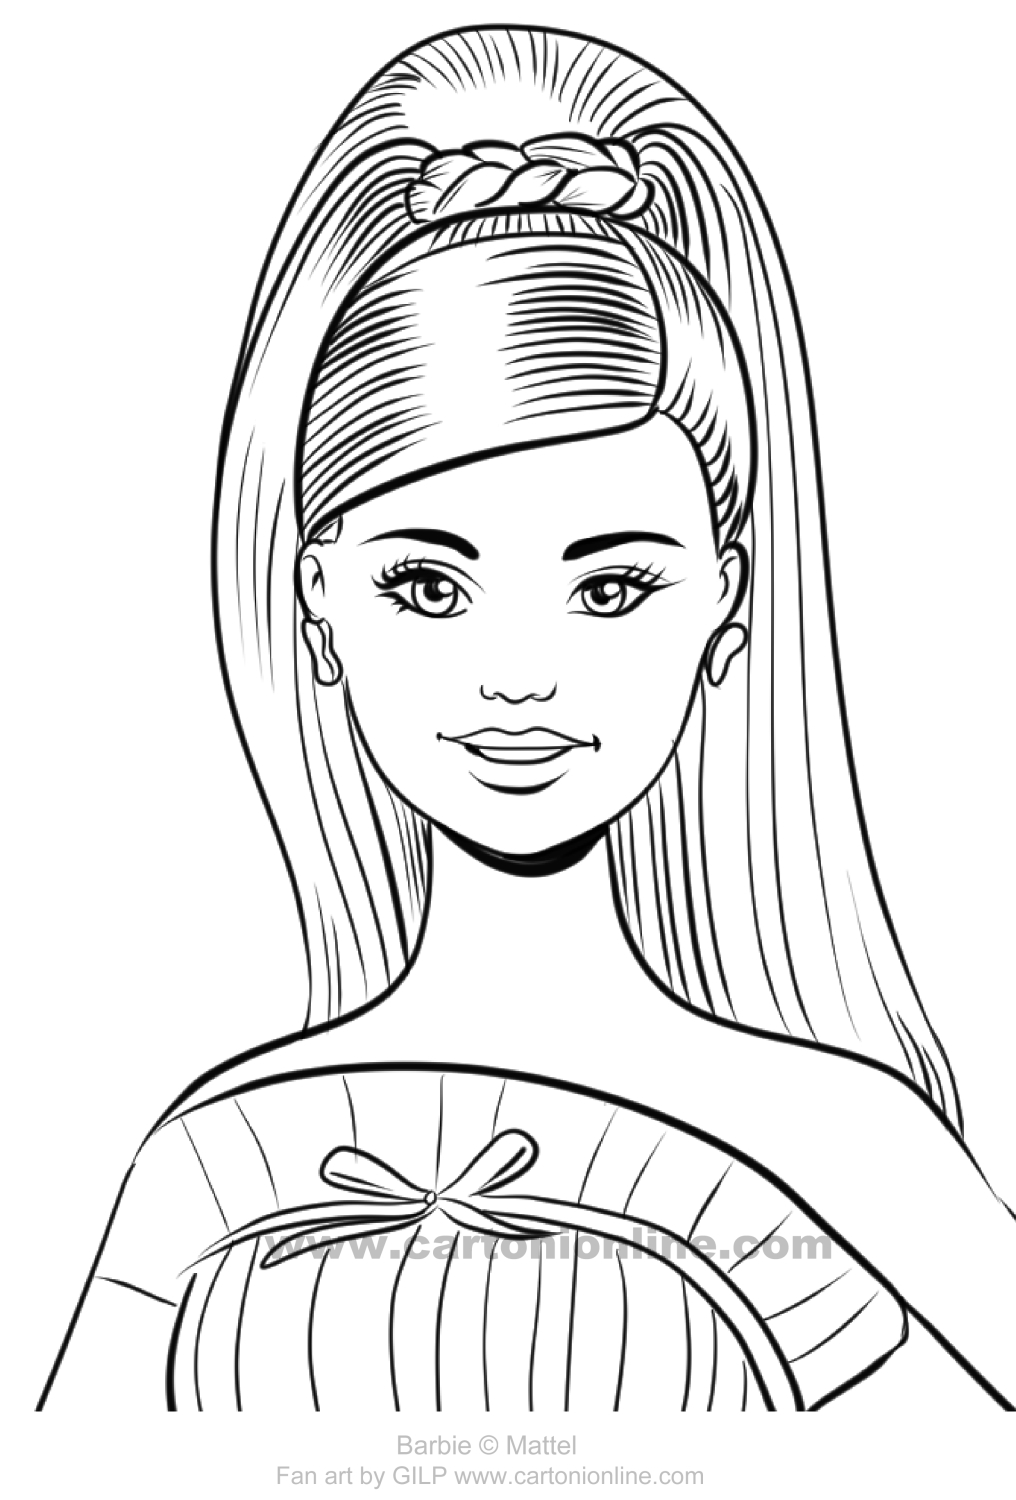 Barbie Fashionista 20  coloring page to print and coloring